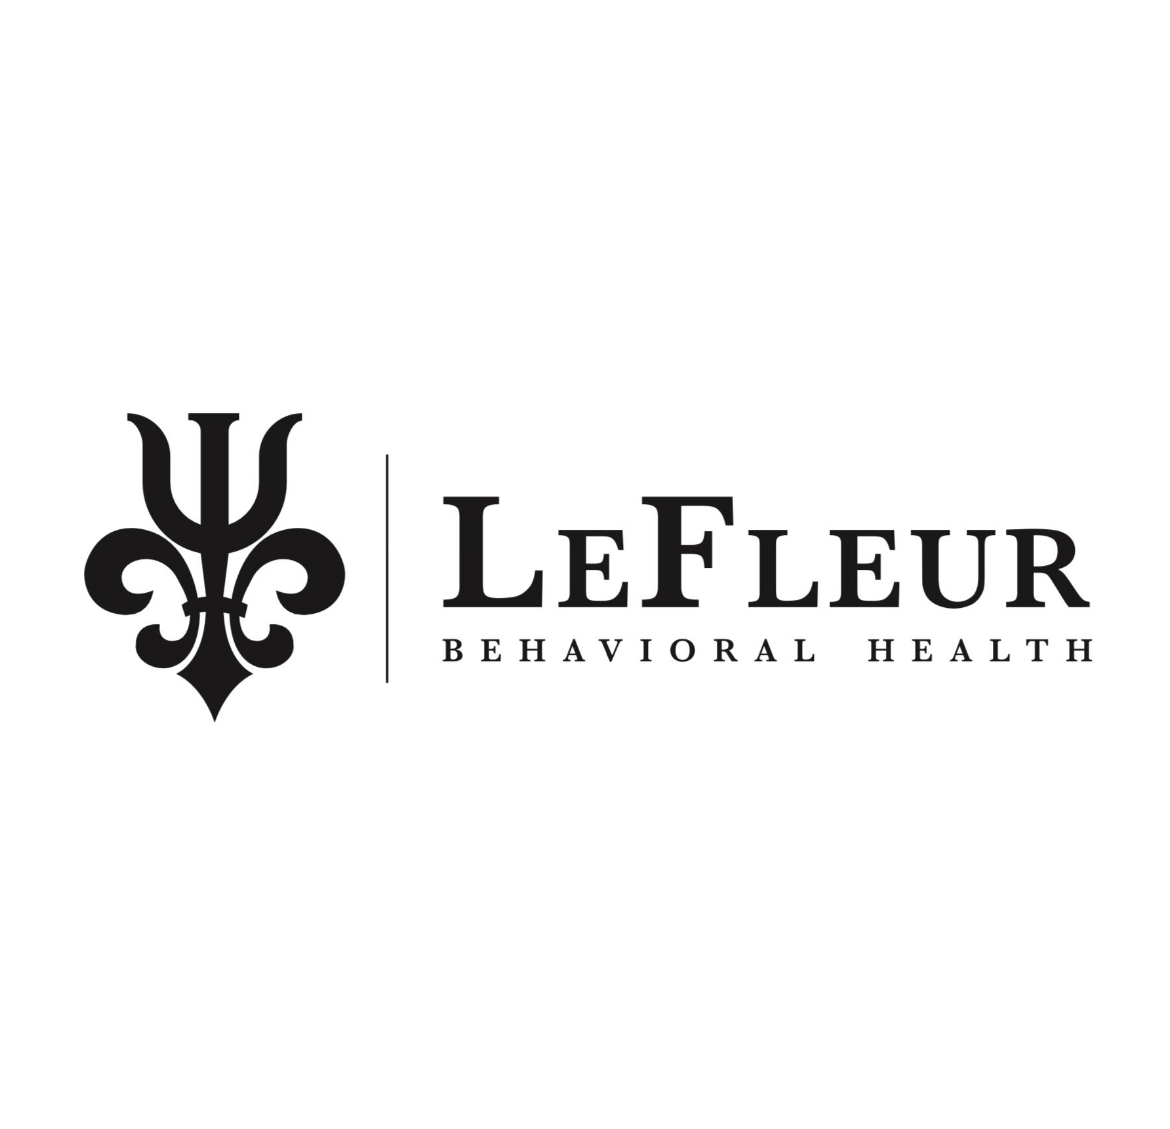 Gallery Photo of Welcome to our practice, LeFleur Behavioral Health!  Please visit our website, or call us to learn more about our services.